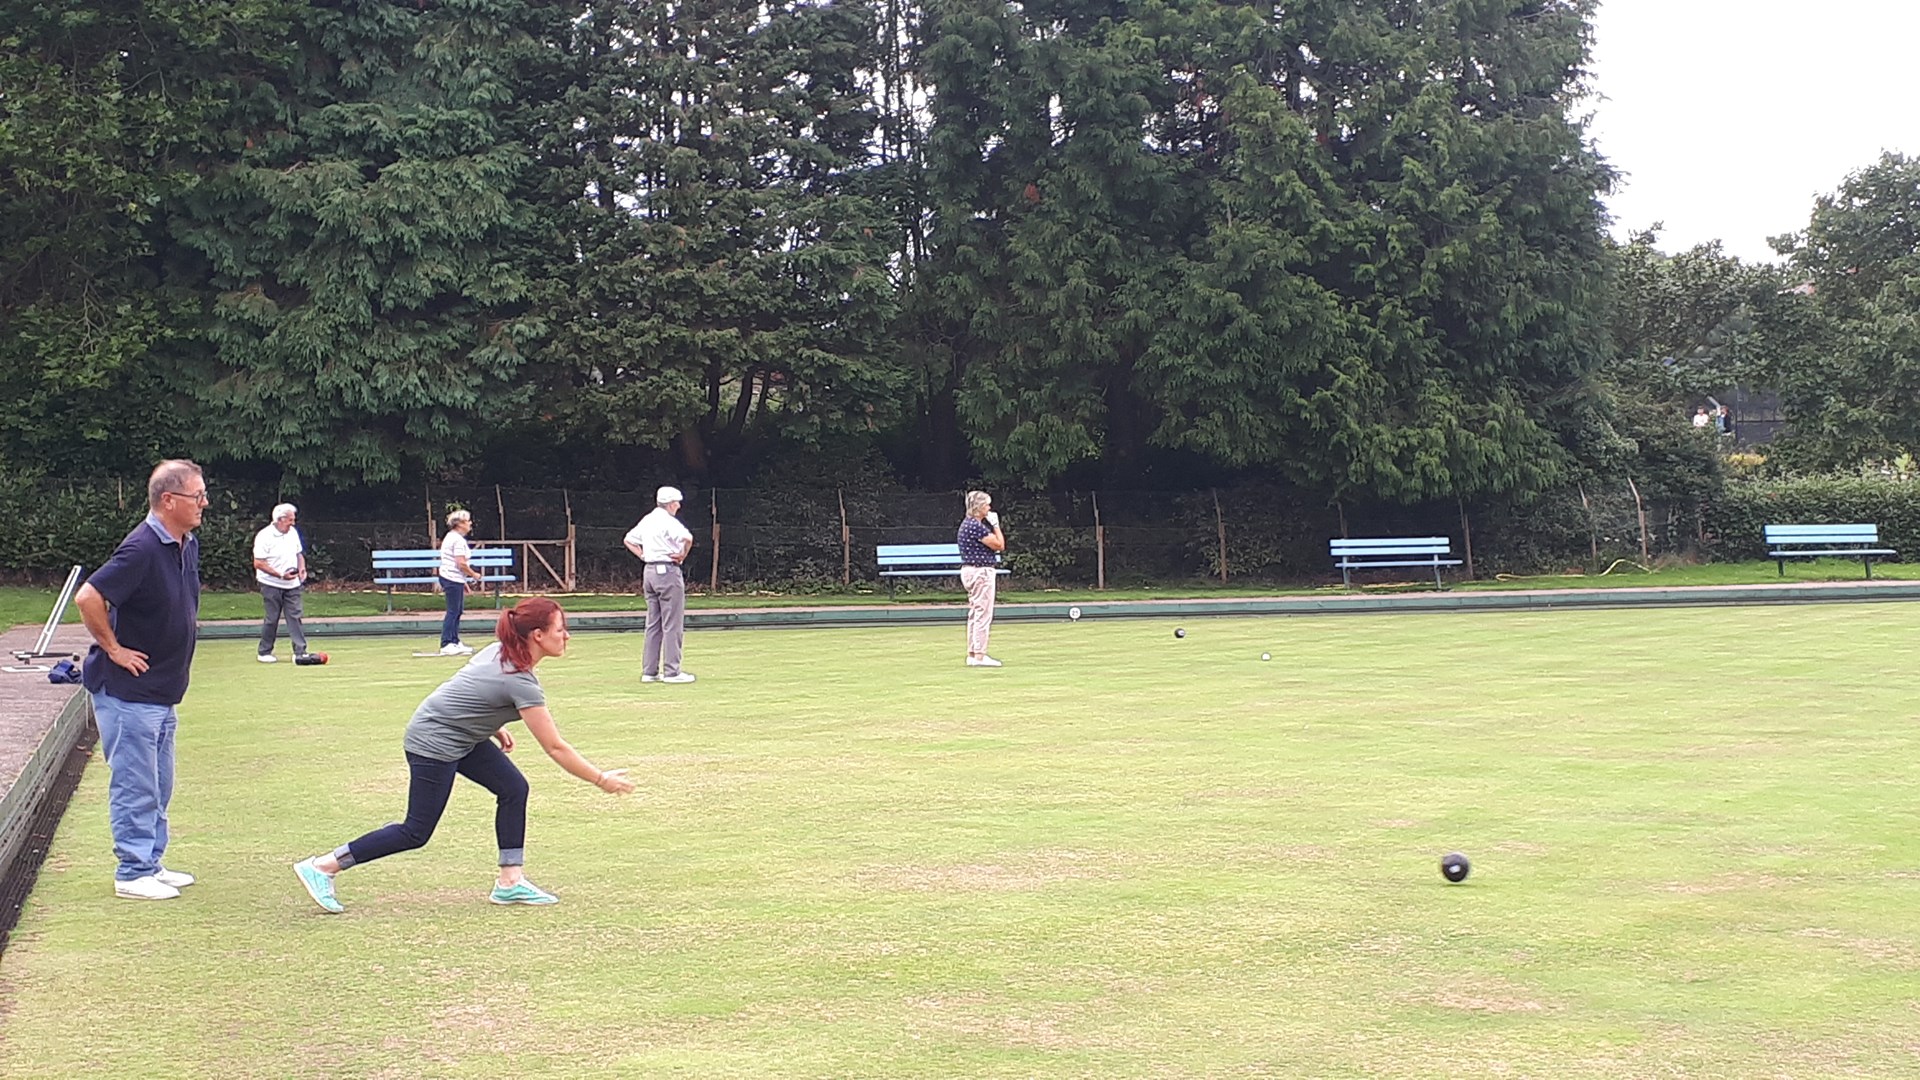 Heavitree Bowls Club About Us